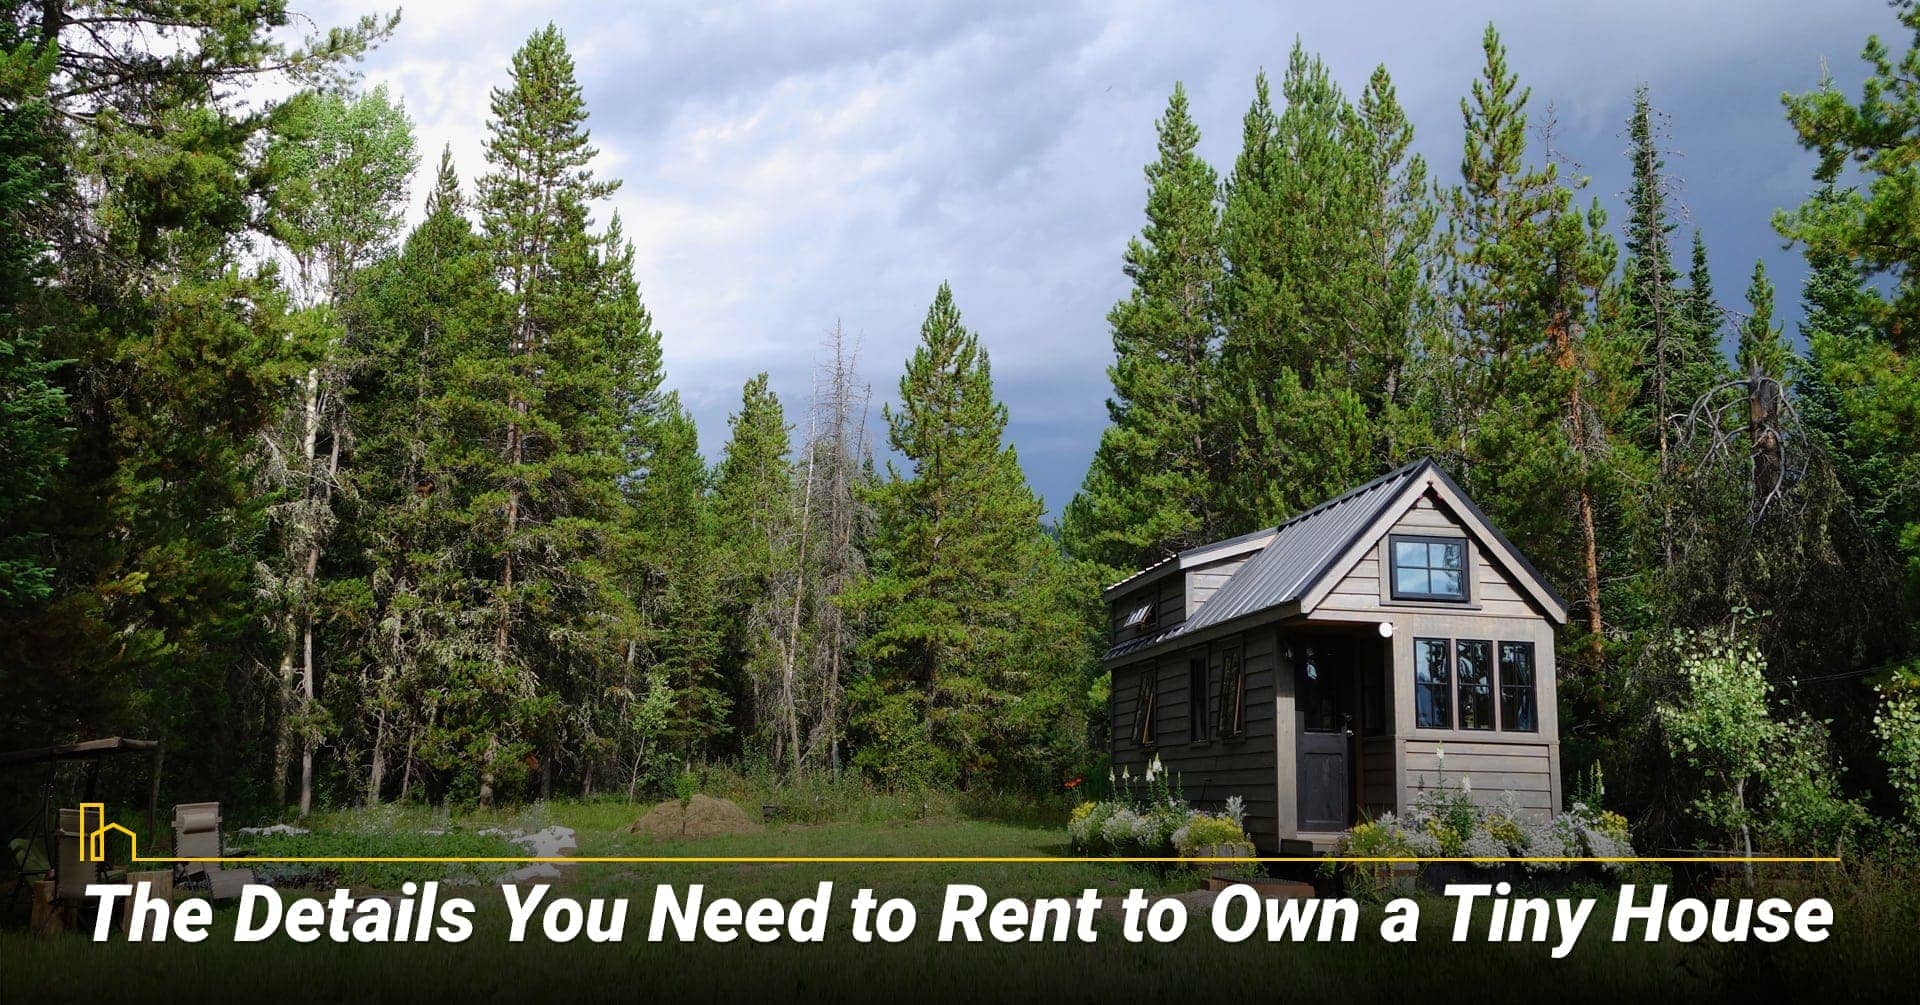 The Details You Need to Rent to Own a Tiny House, things need to know about rent to own a tiny house